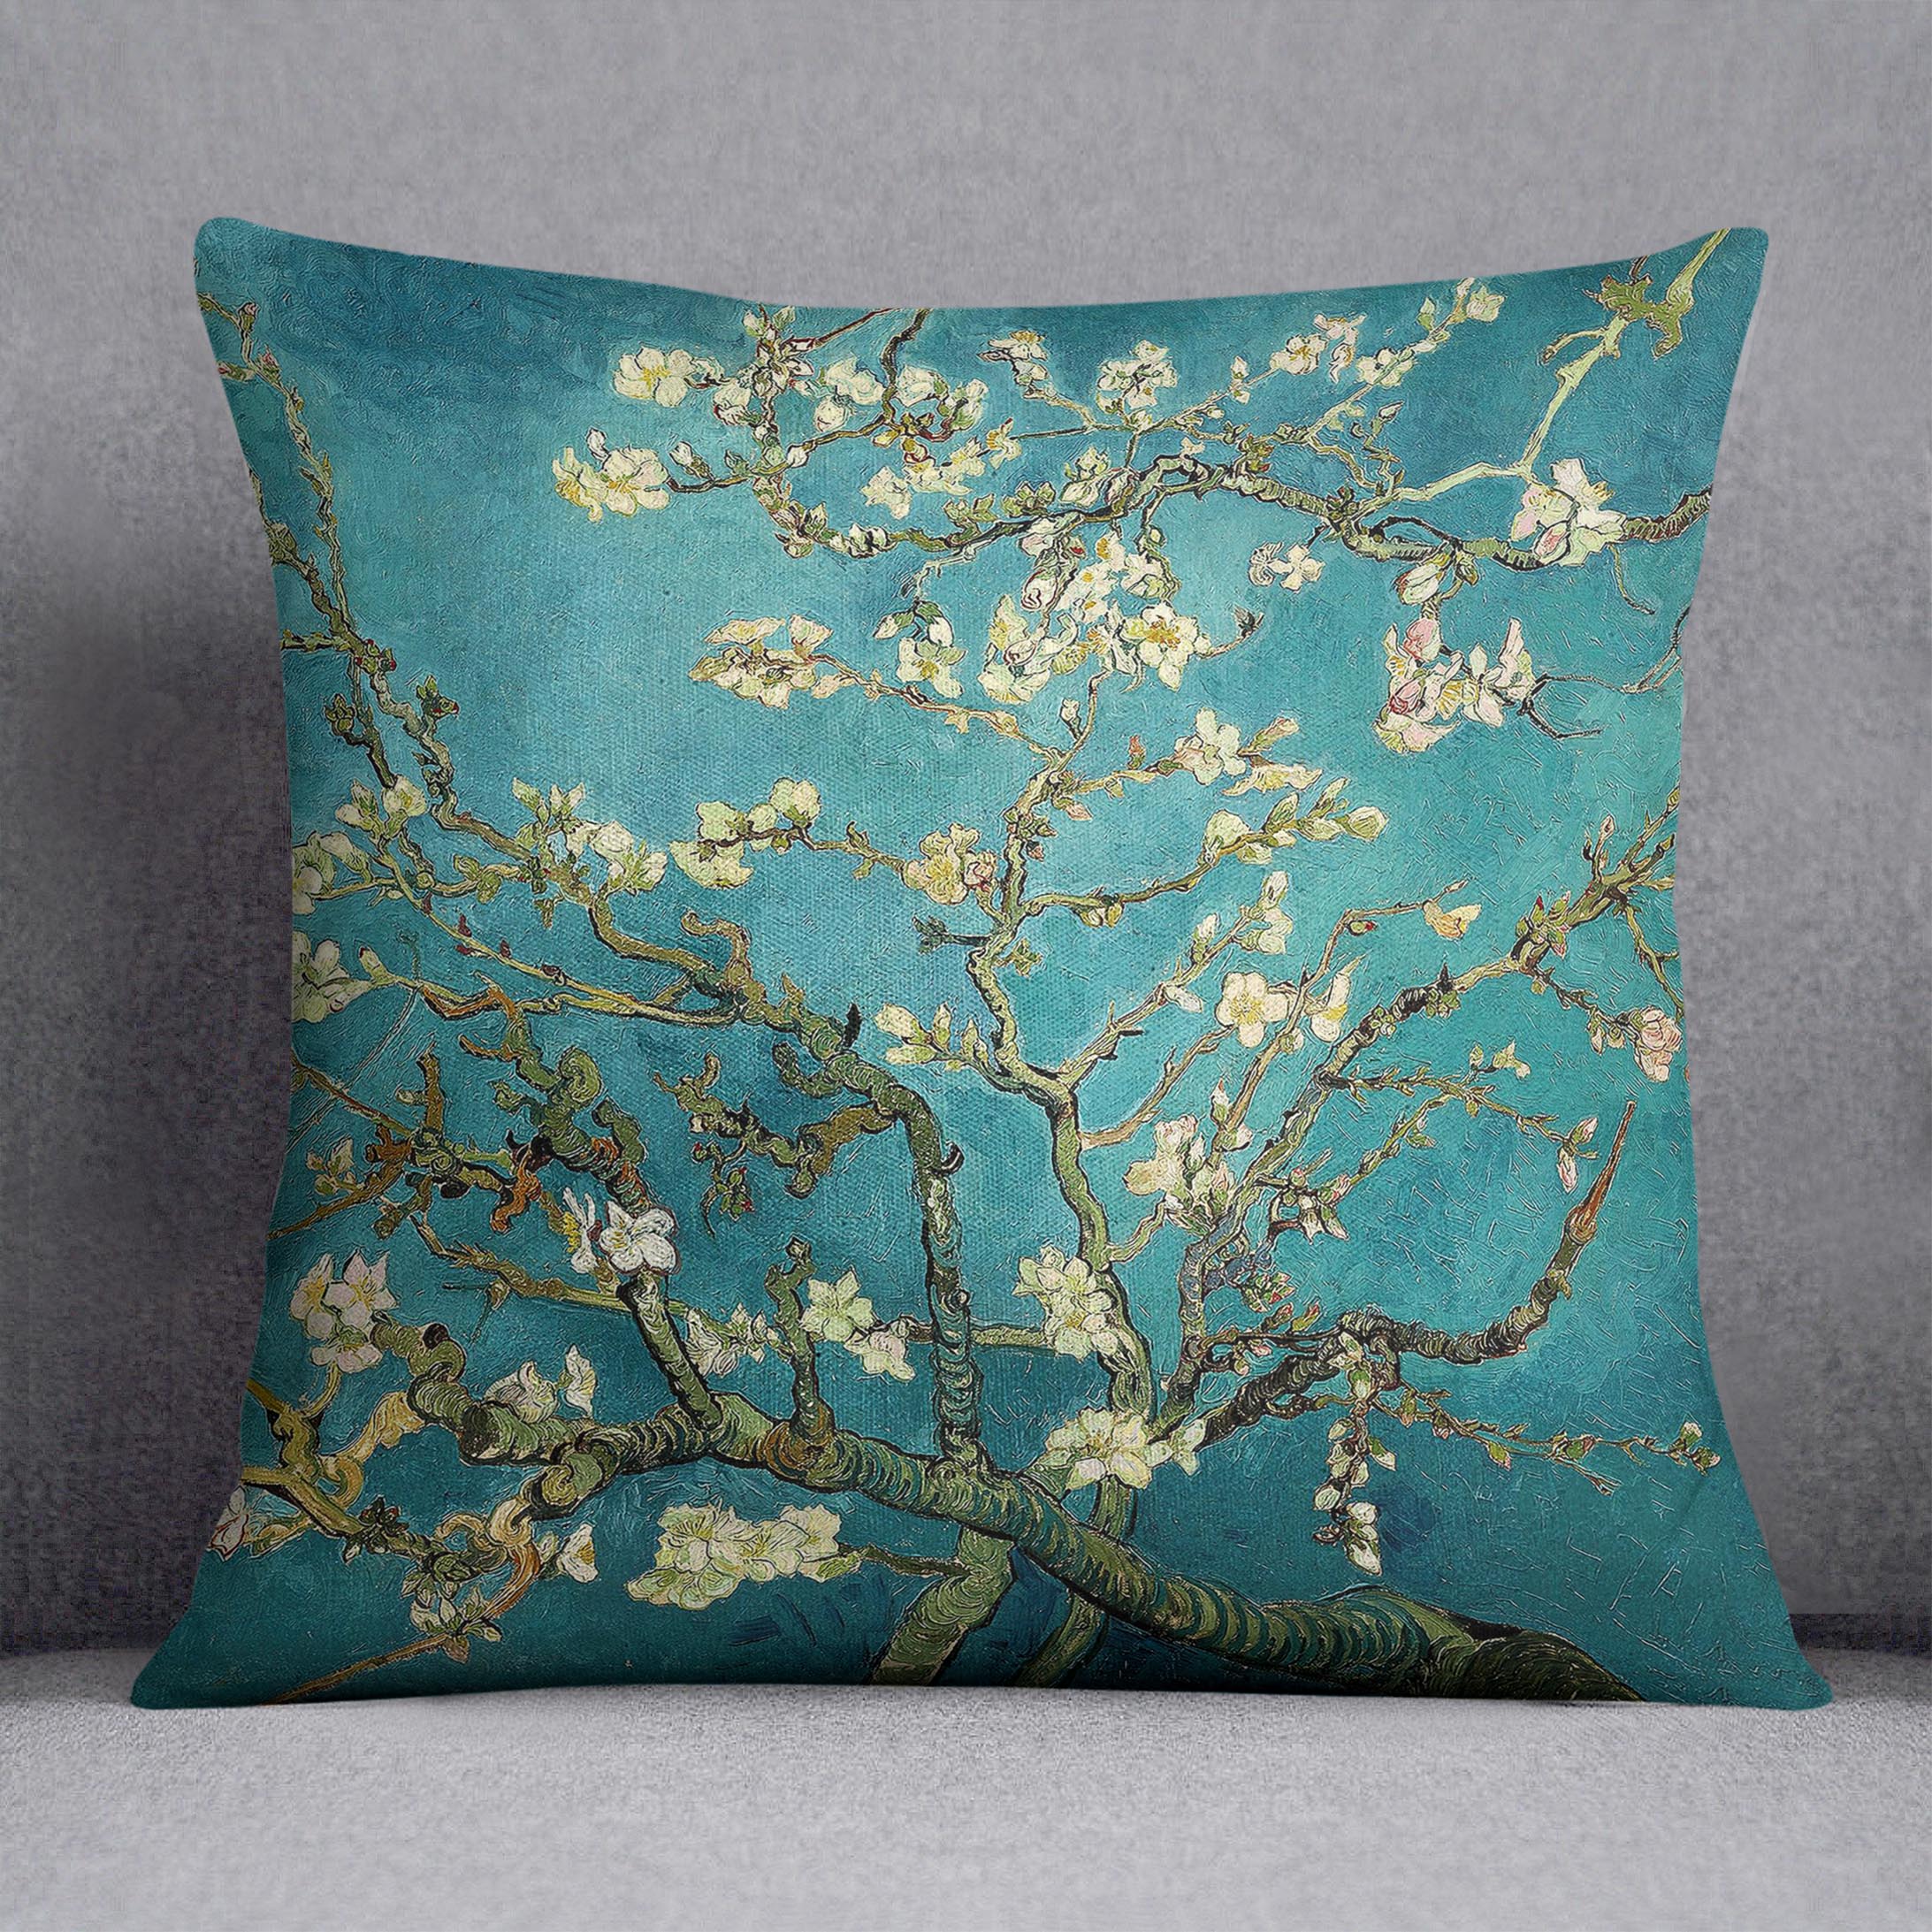 Blossoming Almond Tree by Van Gogh Cushion